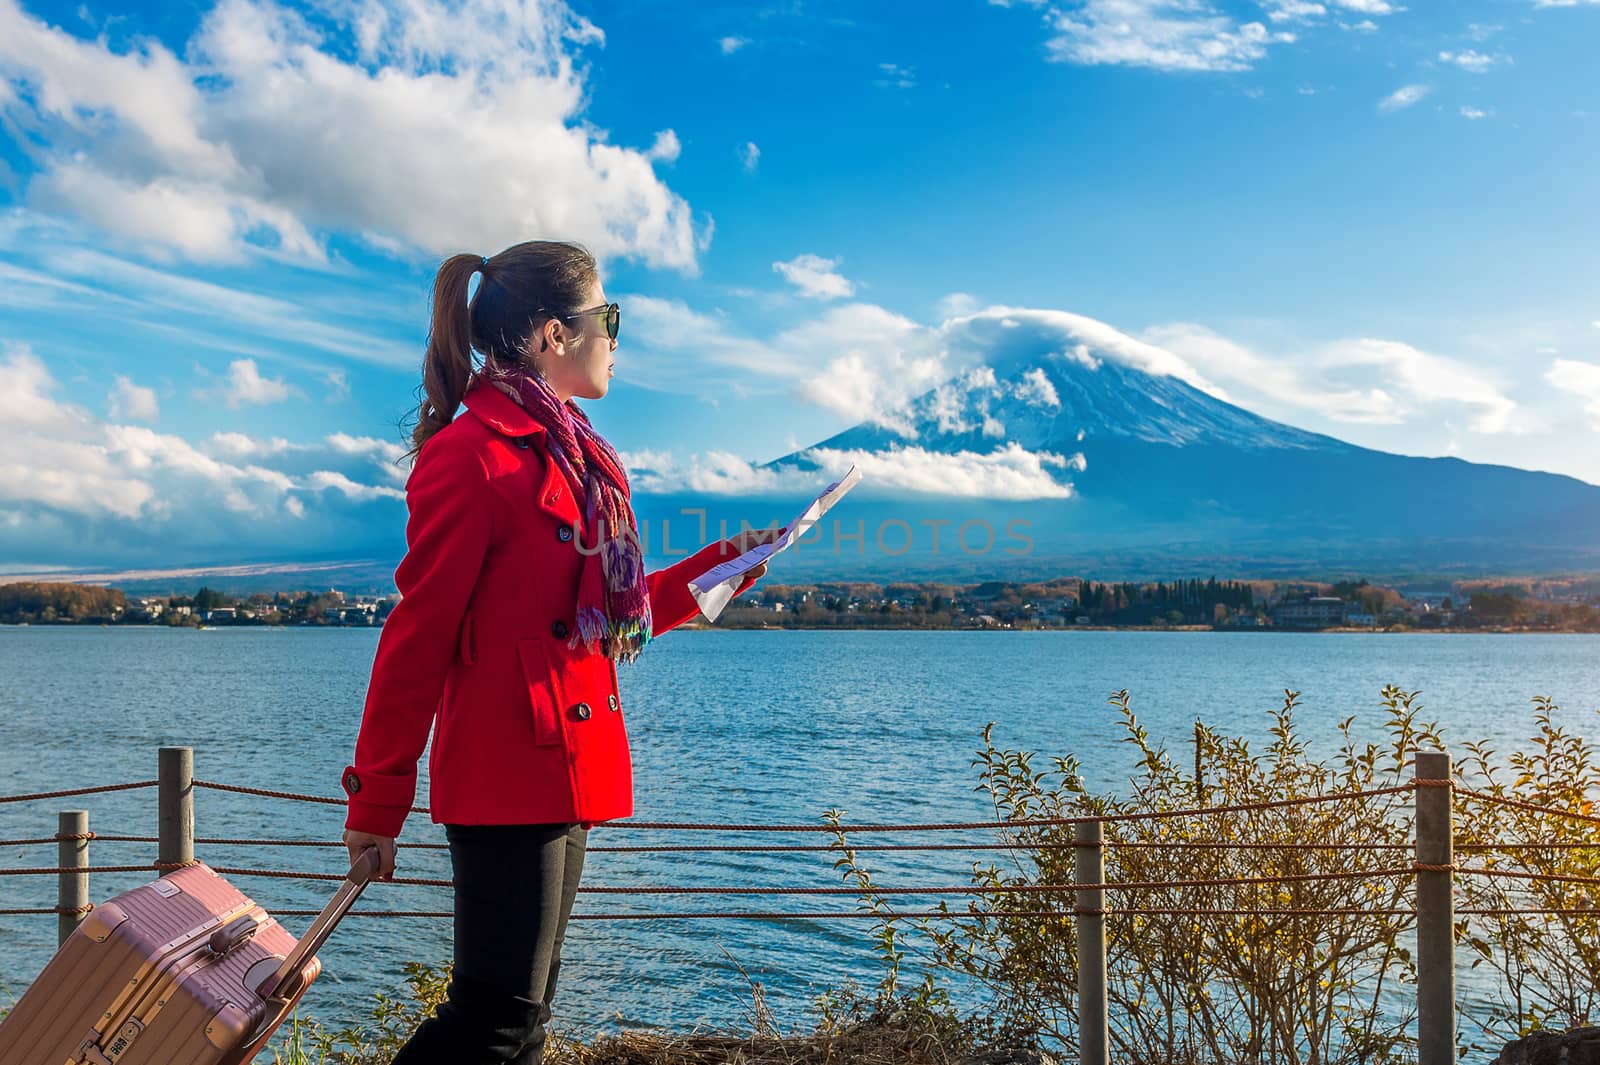 Tourist with baggage and map at Fuji mountain, Kawaguchiko in Japan. by gutarphotoghaphy